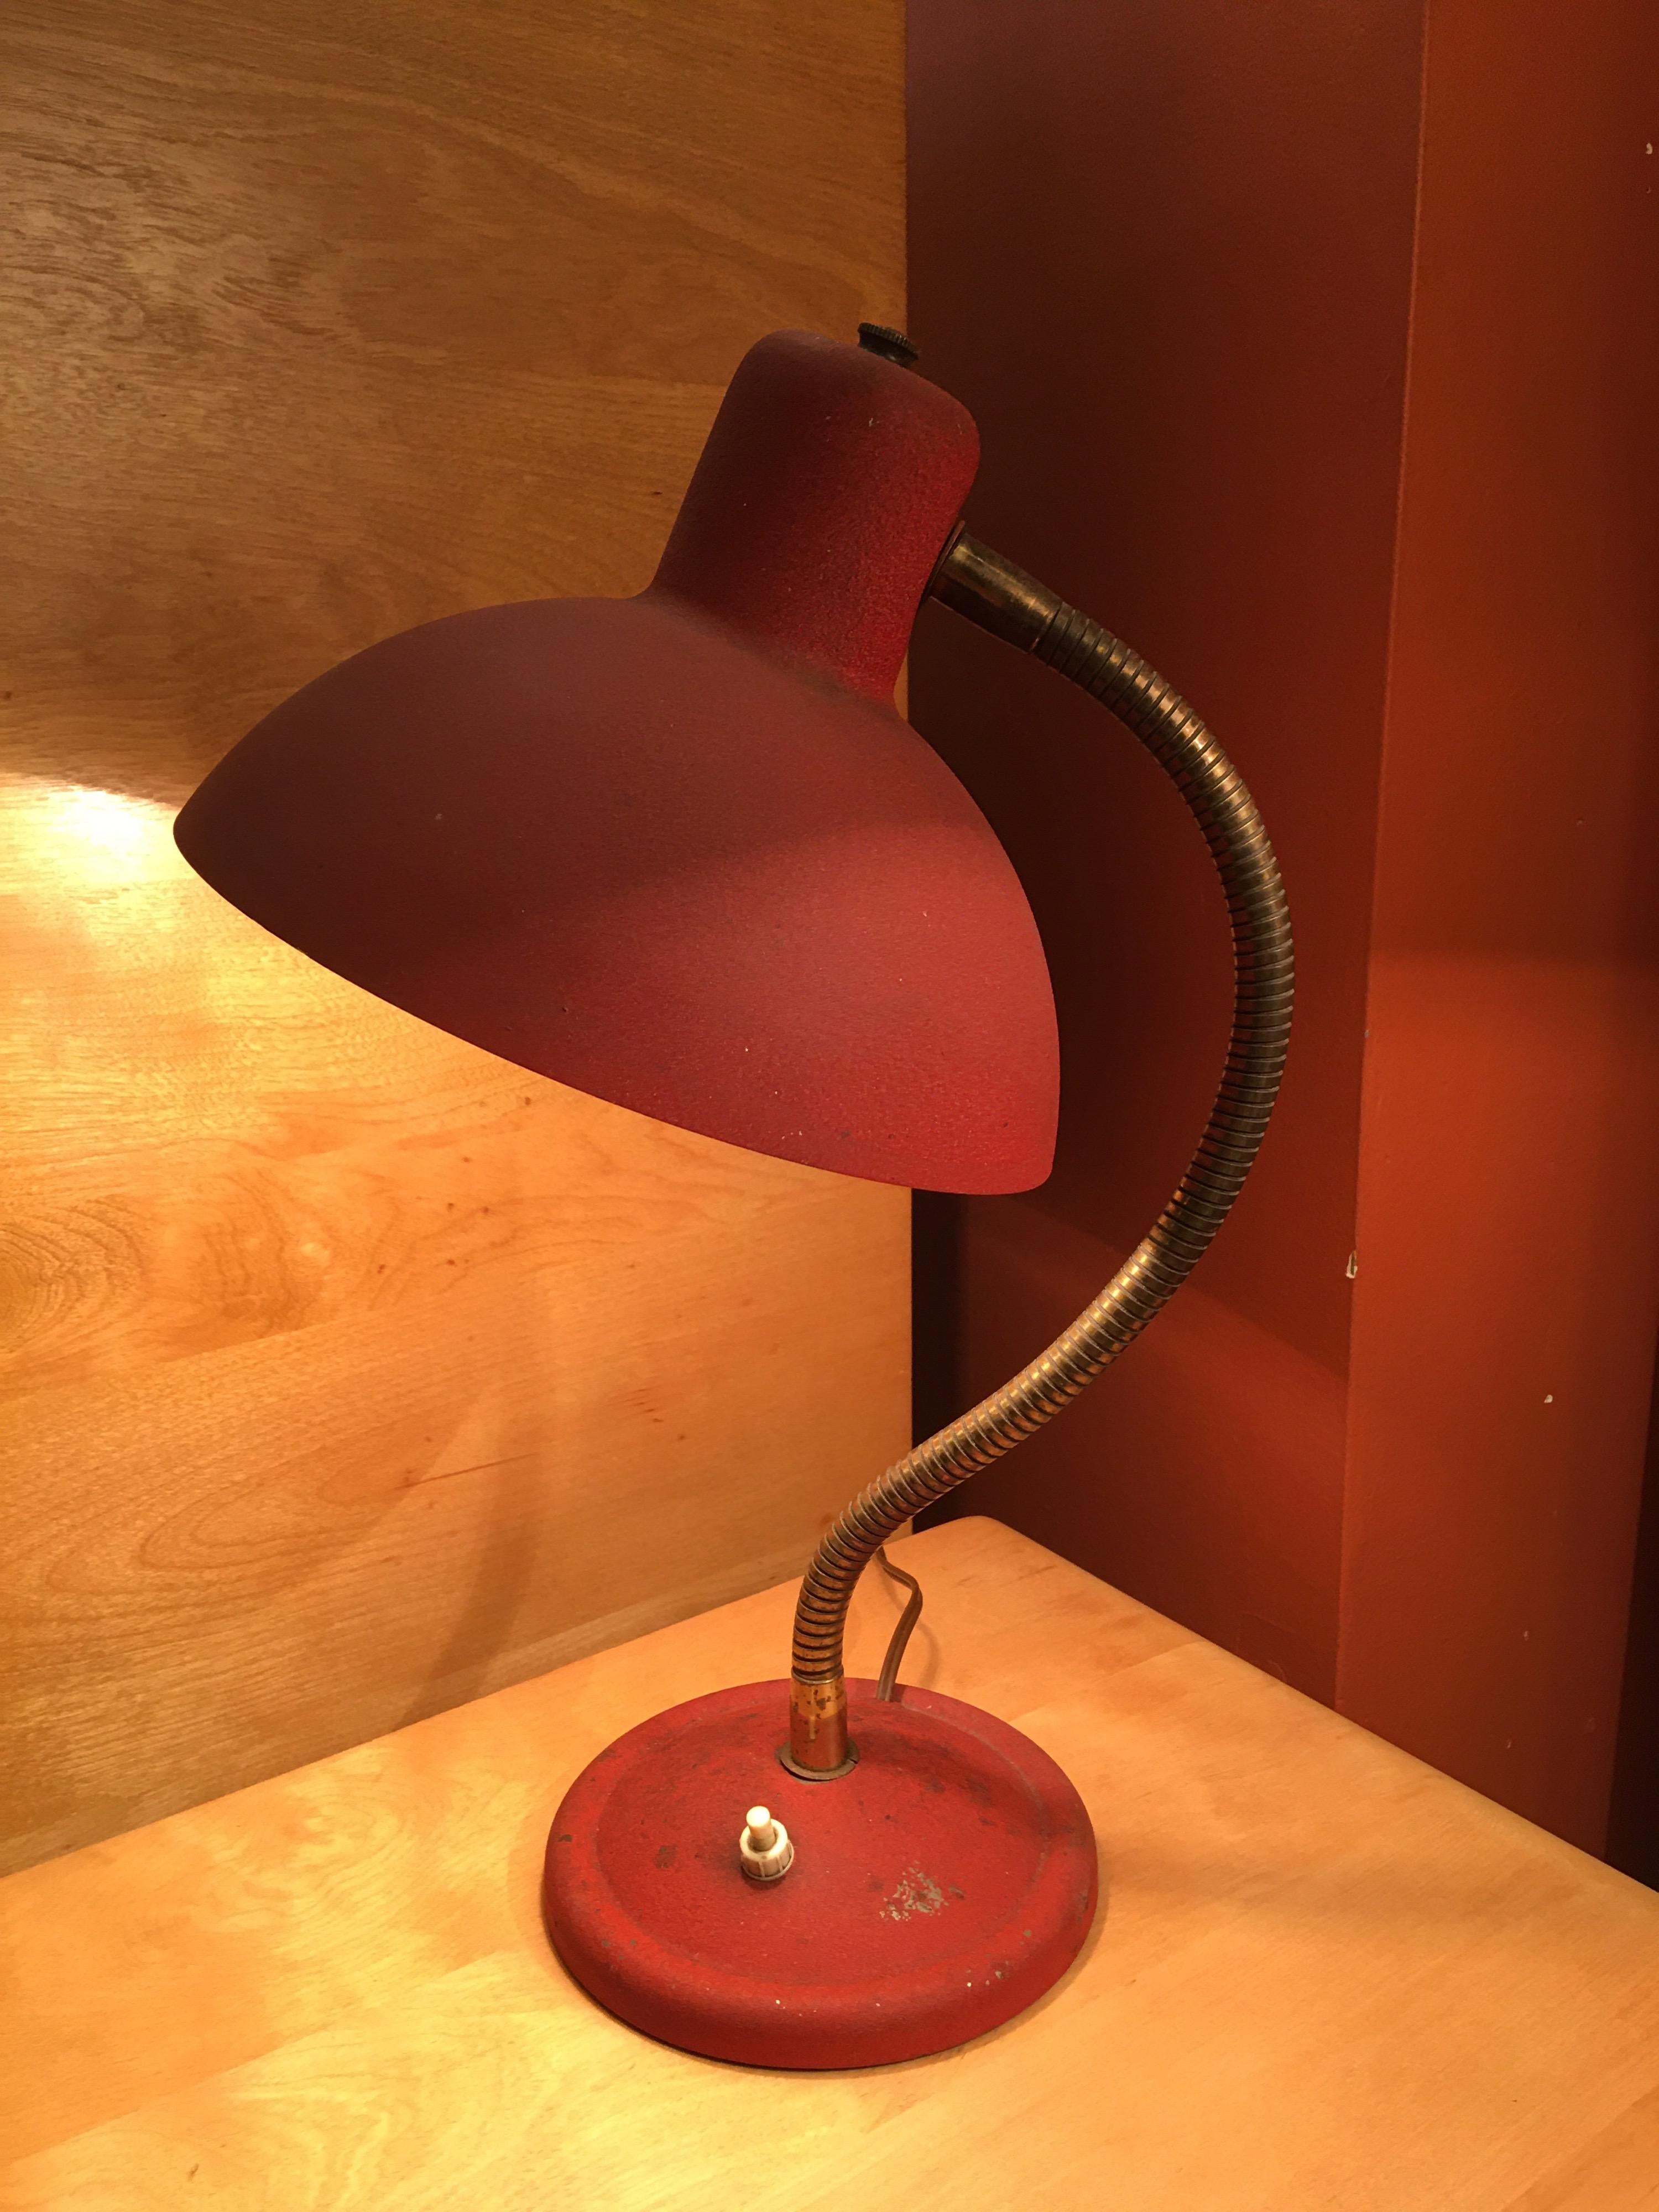 Small Italian table or desk lamp retaining its original red paint and on/off switch. Goose neck design allows for multiple positions. Base and shade has a textured paint finish. Goose neck is in a brass material.